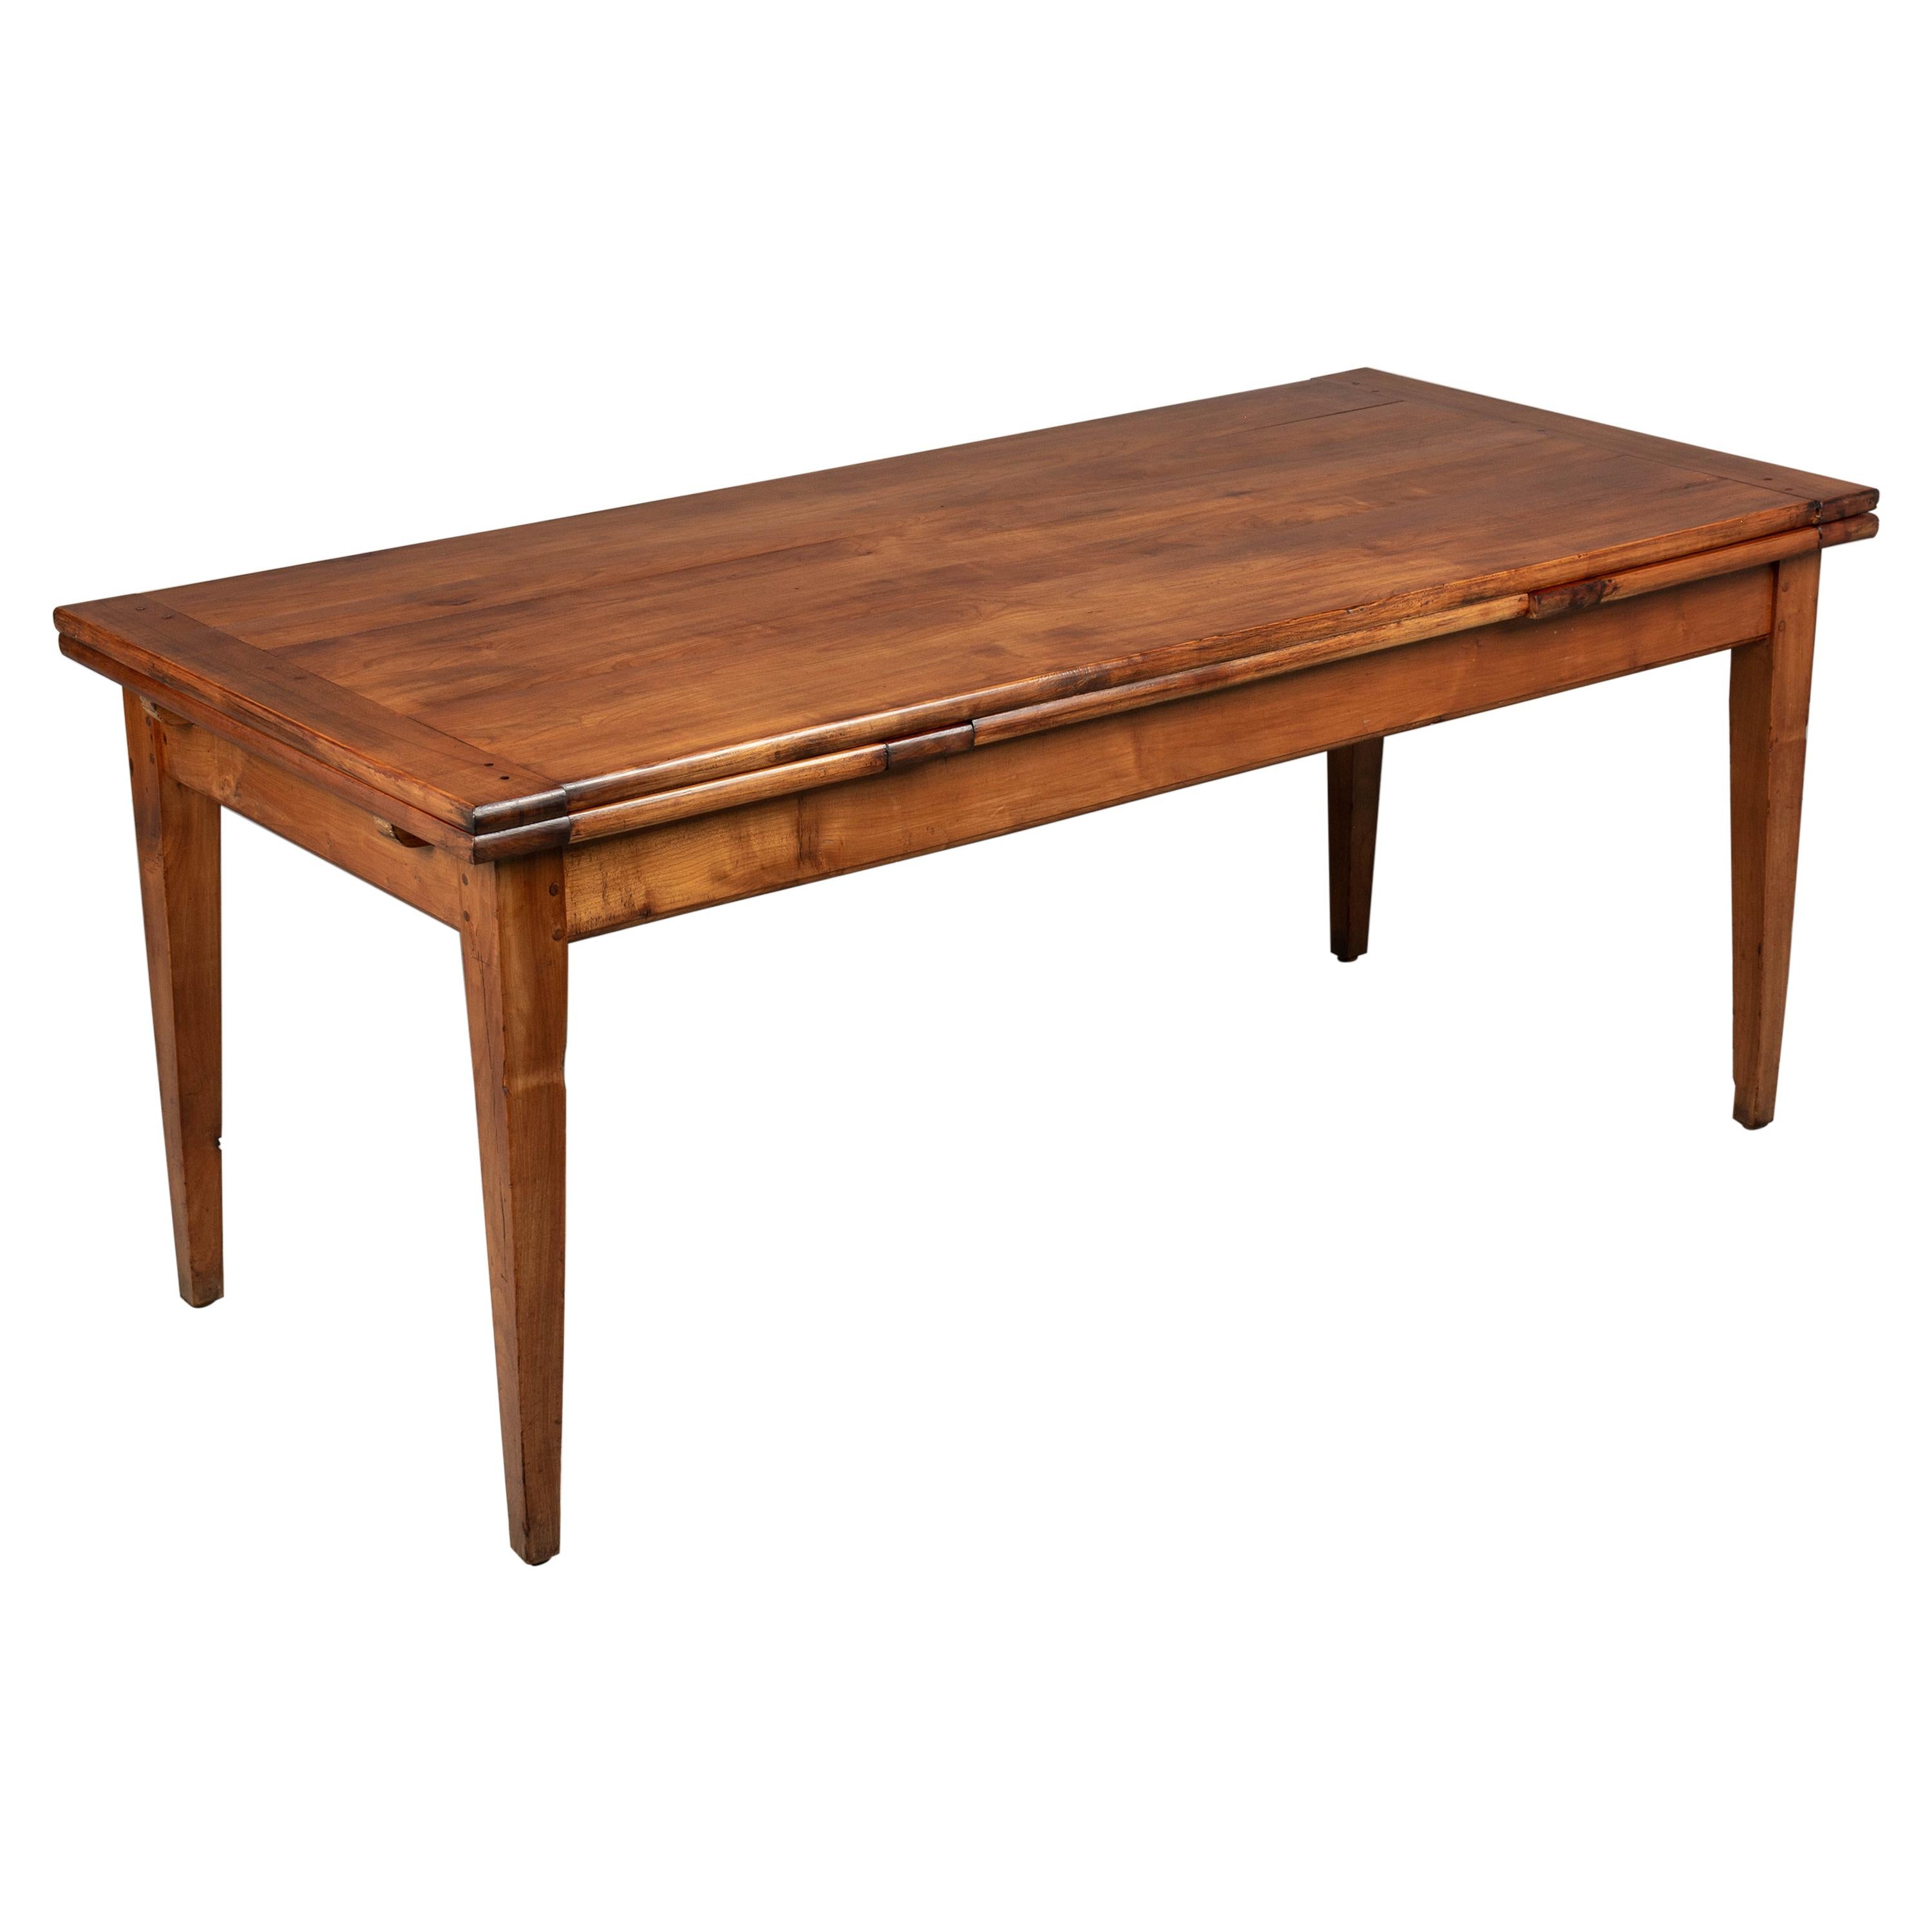 Country French Cherry Farm Table or Extension Dining Table